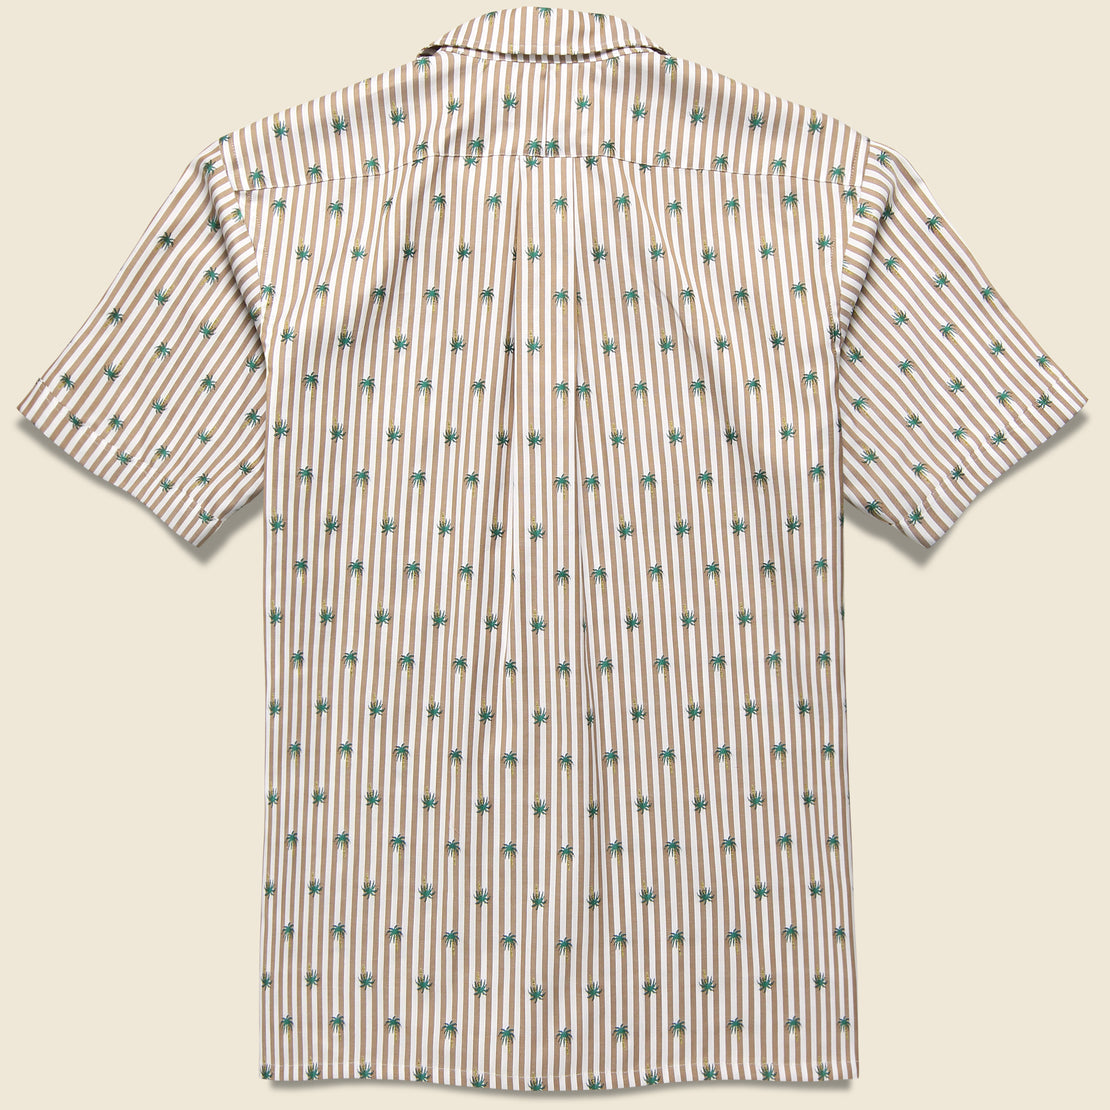 Bengal Stripe Palm Oxford - Tan/White/Green - Hamilton Shirt Co. - STAG Provisions - Tops - S/S Woven - Other Pattern